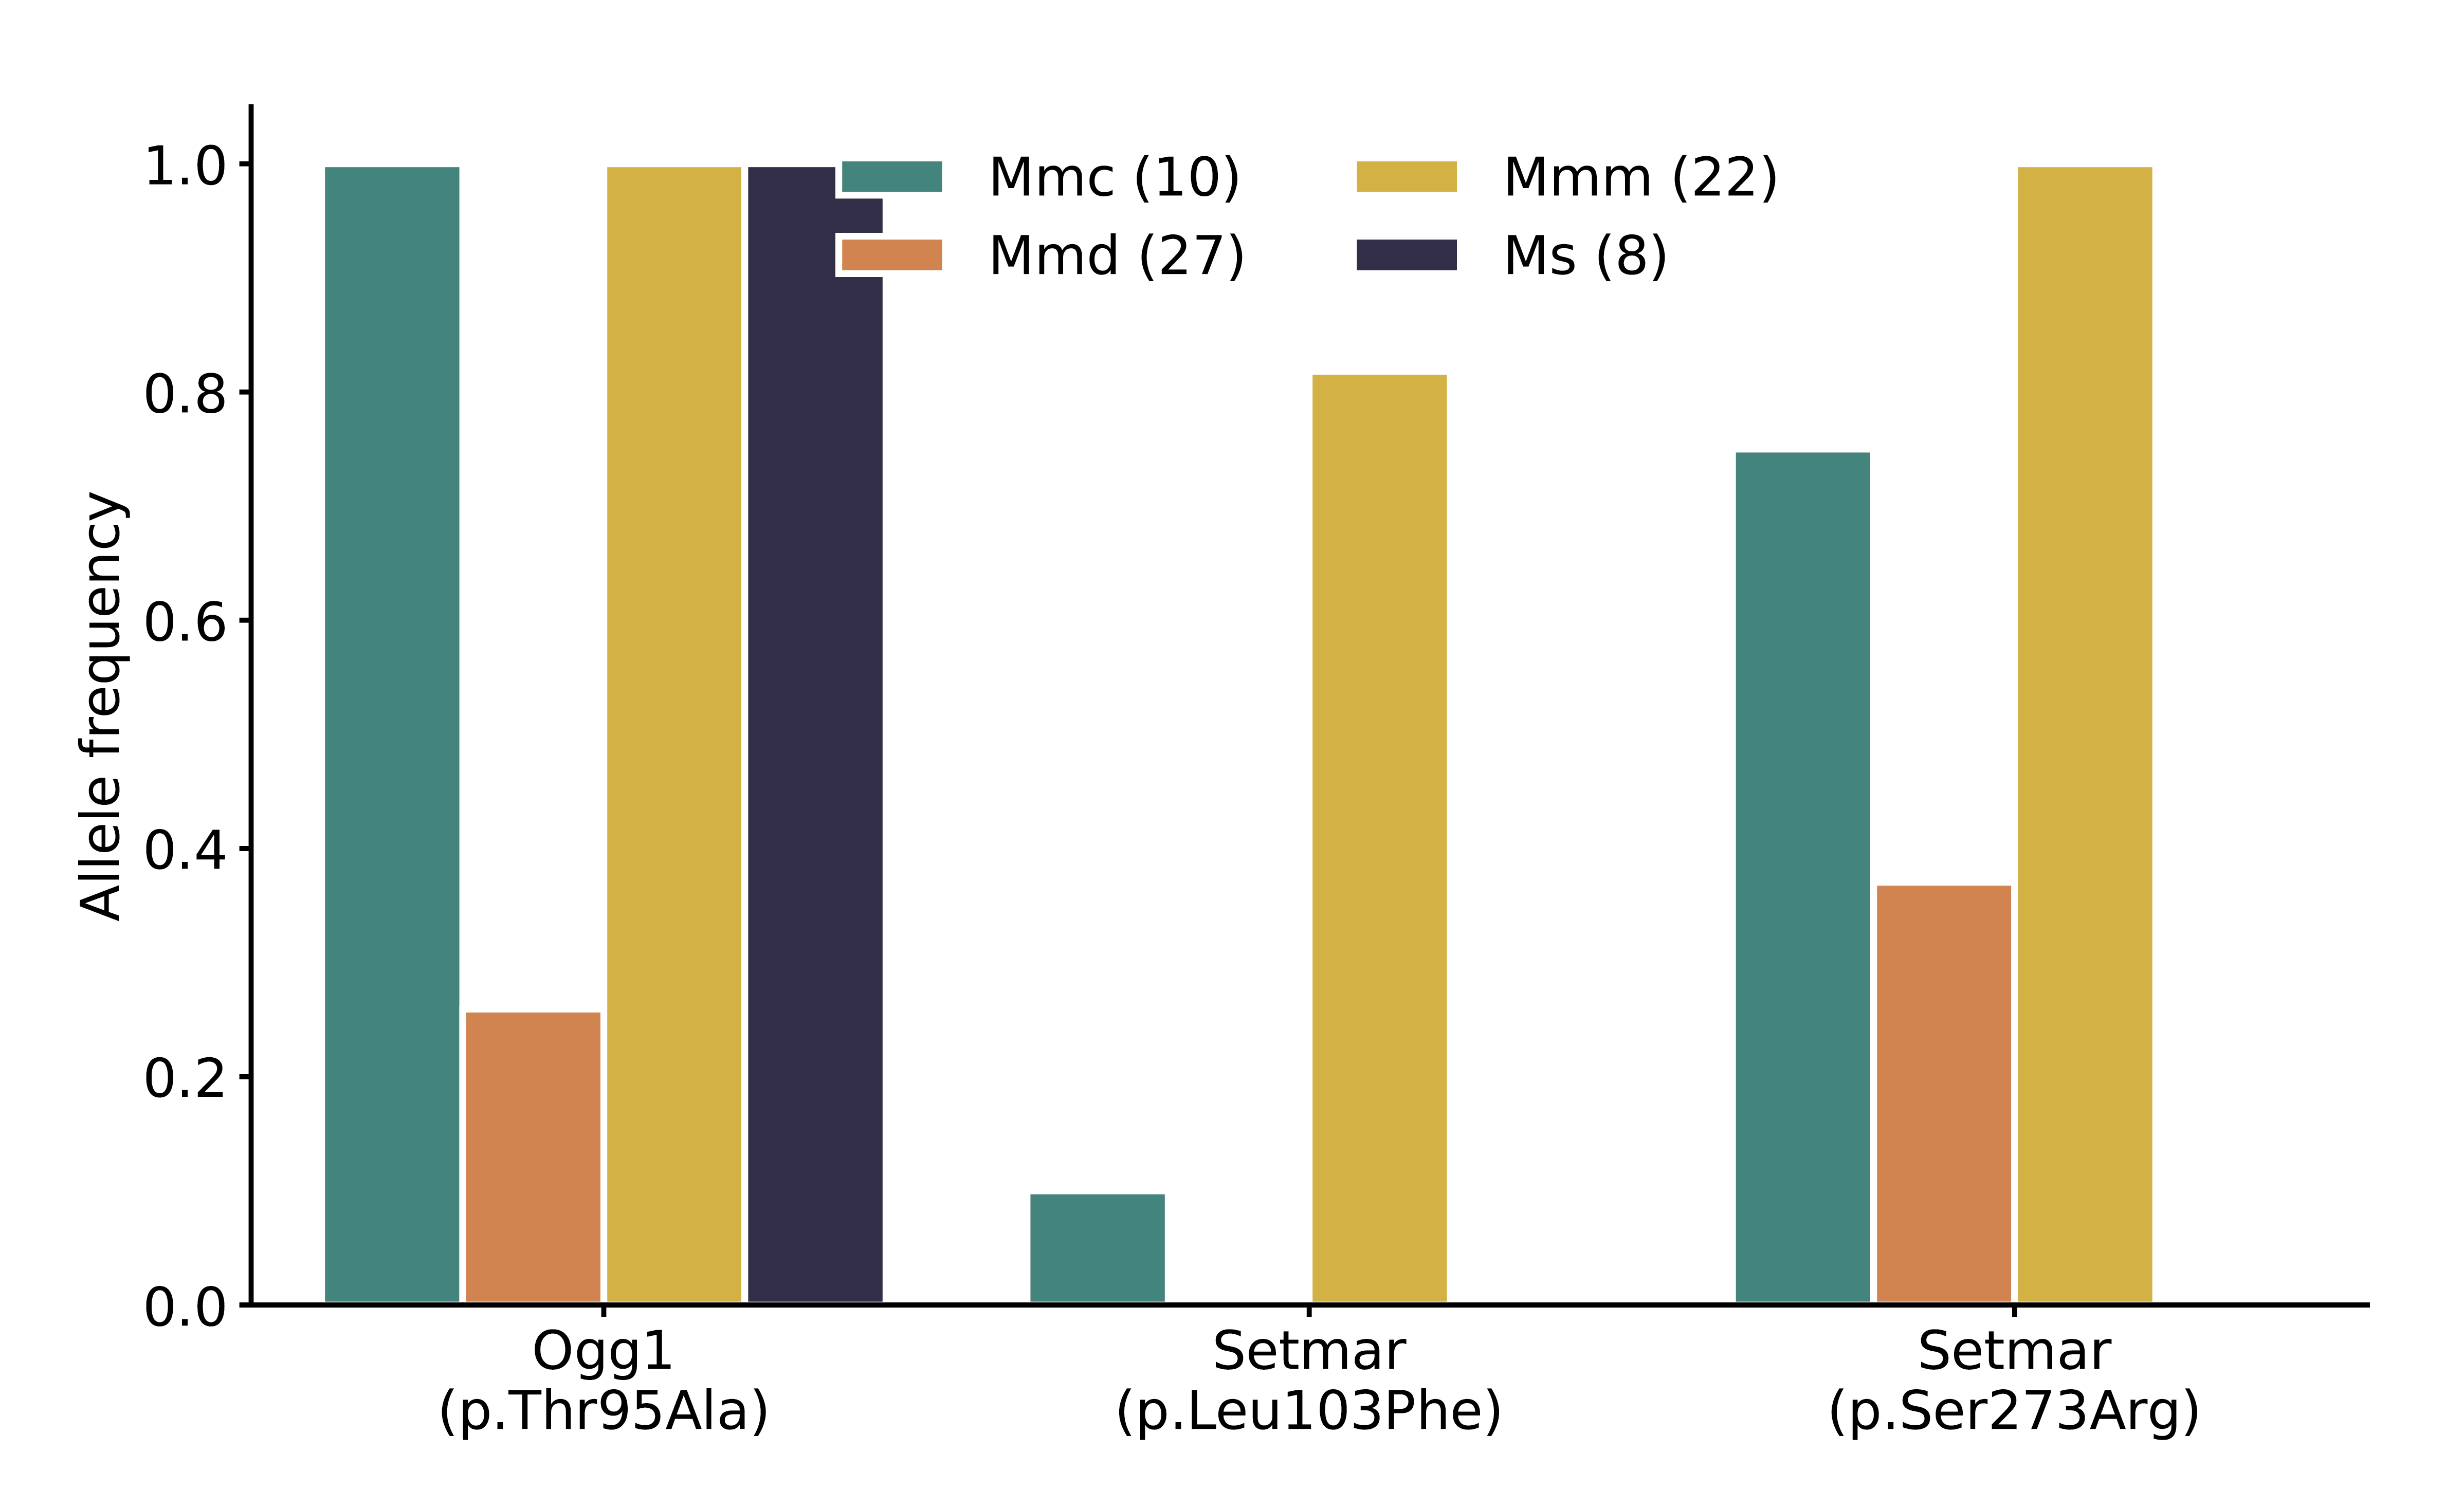 Figure 3-figure supplement 3: Frequency of nonsynonymous DNA repair mutations in wild mice. Alternate allele frequencies of each nonsynonymous DNA repair mutation overlapping the chromosome 6 mutator locus were calculated in populations of wild-derived mice from Harr et al. [32]. Numbers of mice in each subpopulation are shown in parentheses. Mmc (Mus musculus castaneus), Mmd (Mus musculus domesticus), Mmm (Mus musculus musculus), and Ms (Mus spretus). The Mbd4 p.Asp129Asn mutation was not observed in any wild populations.